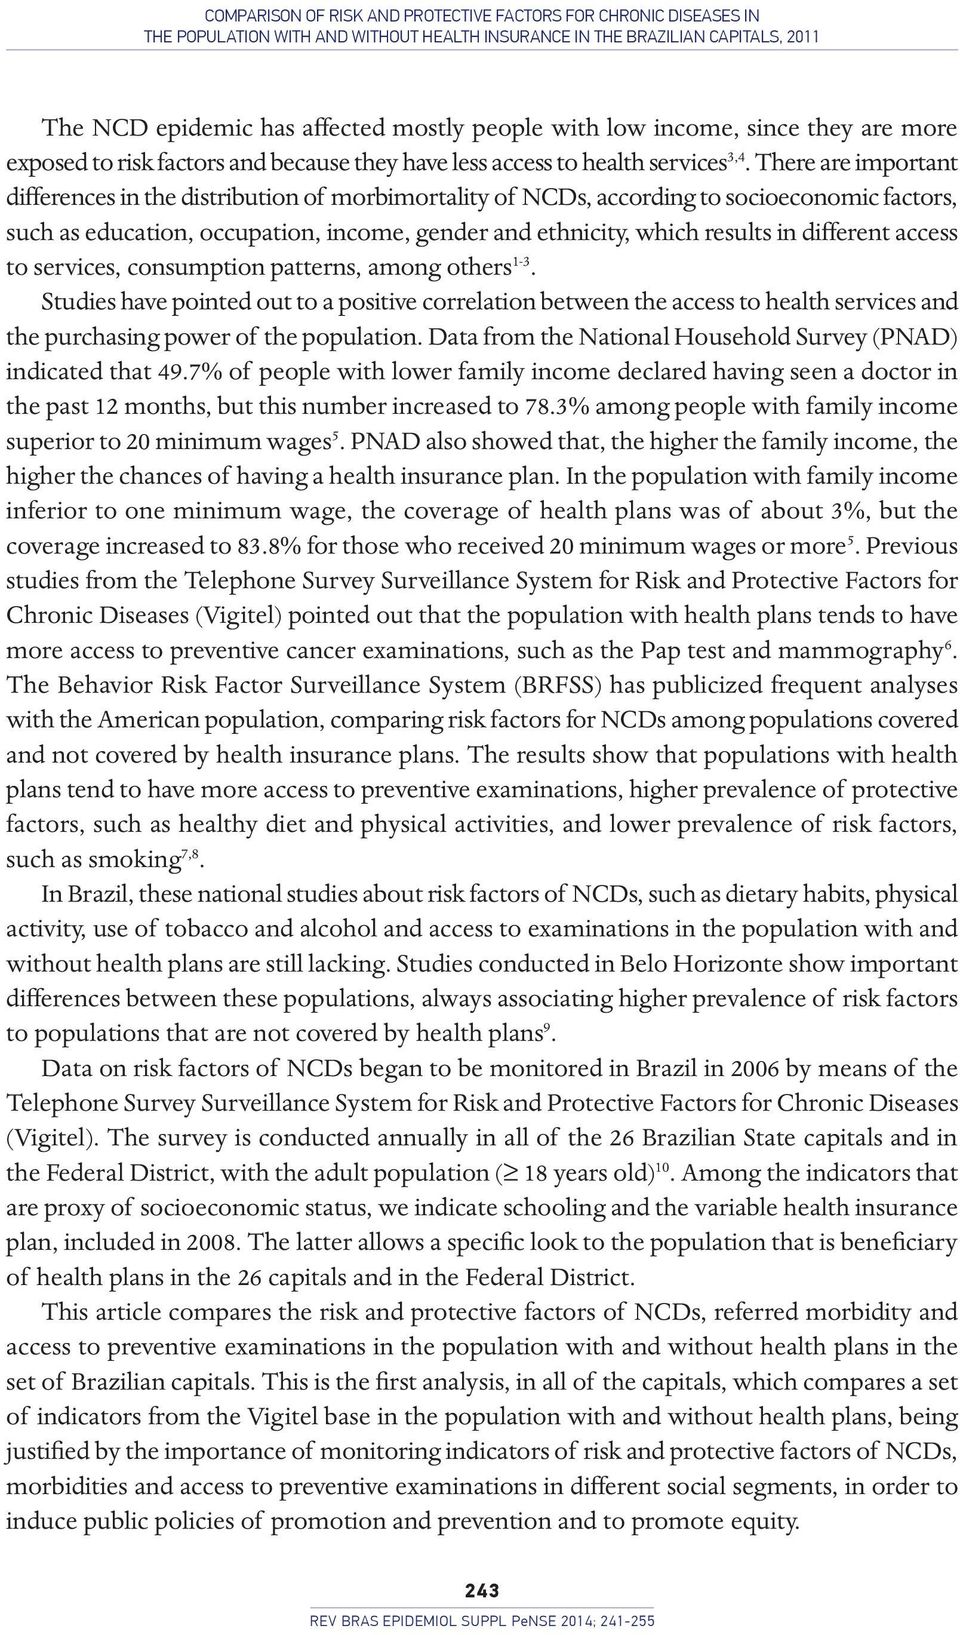 There are important differences in the distribution of morbimortality of NCDs, according to socioeconomic factors, such as education, occupation, income, gender and ethnicity, which results in